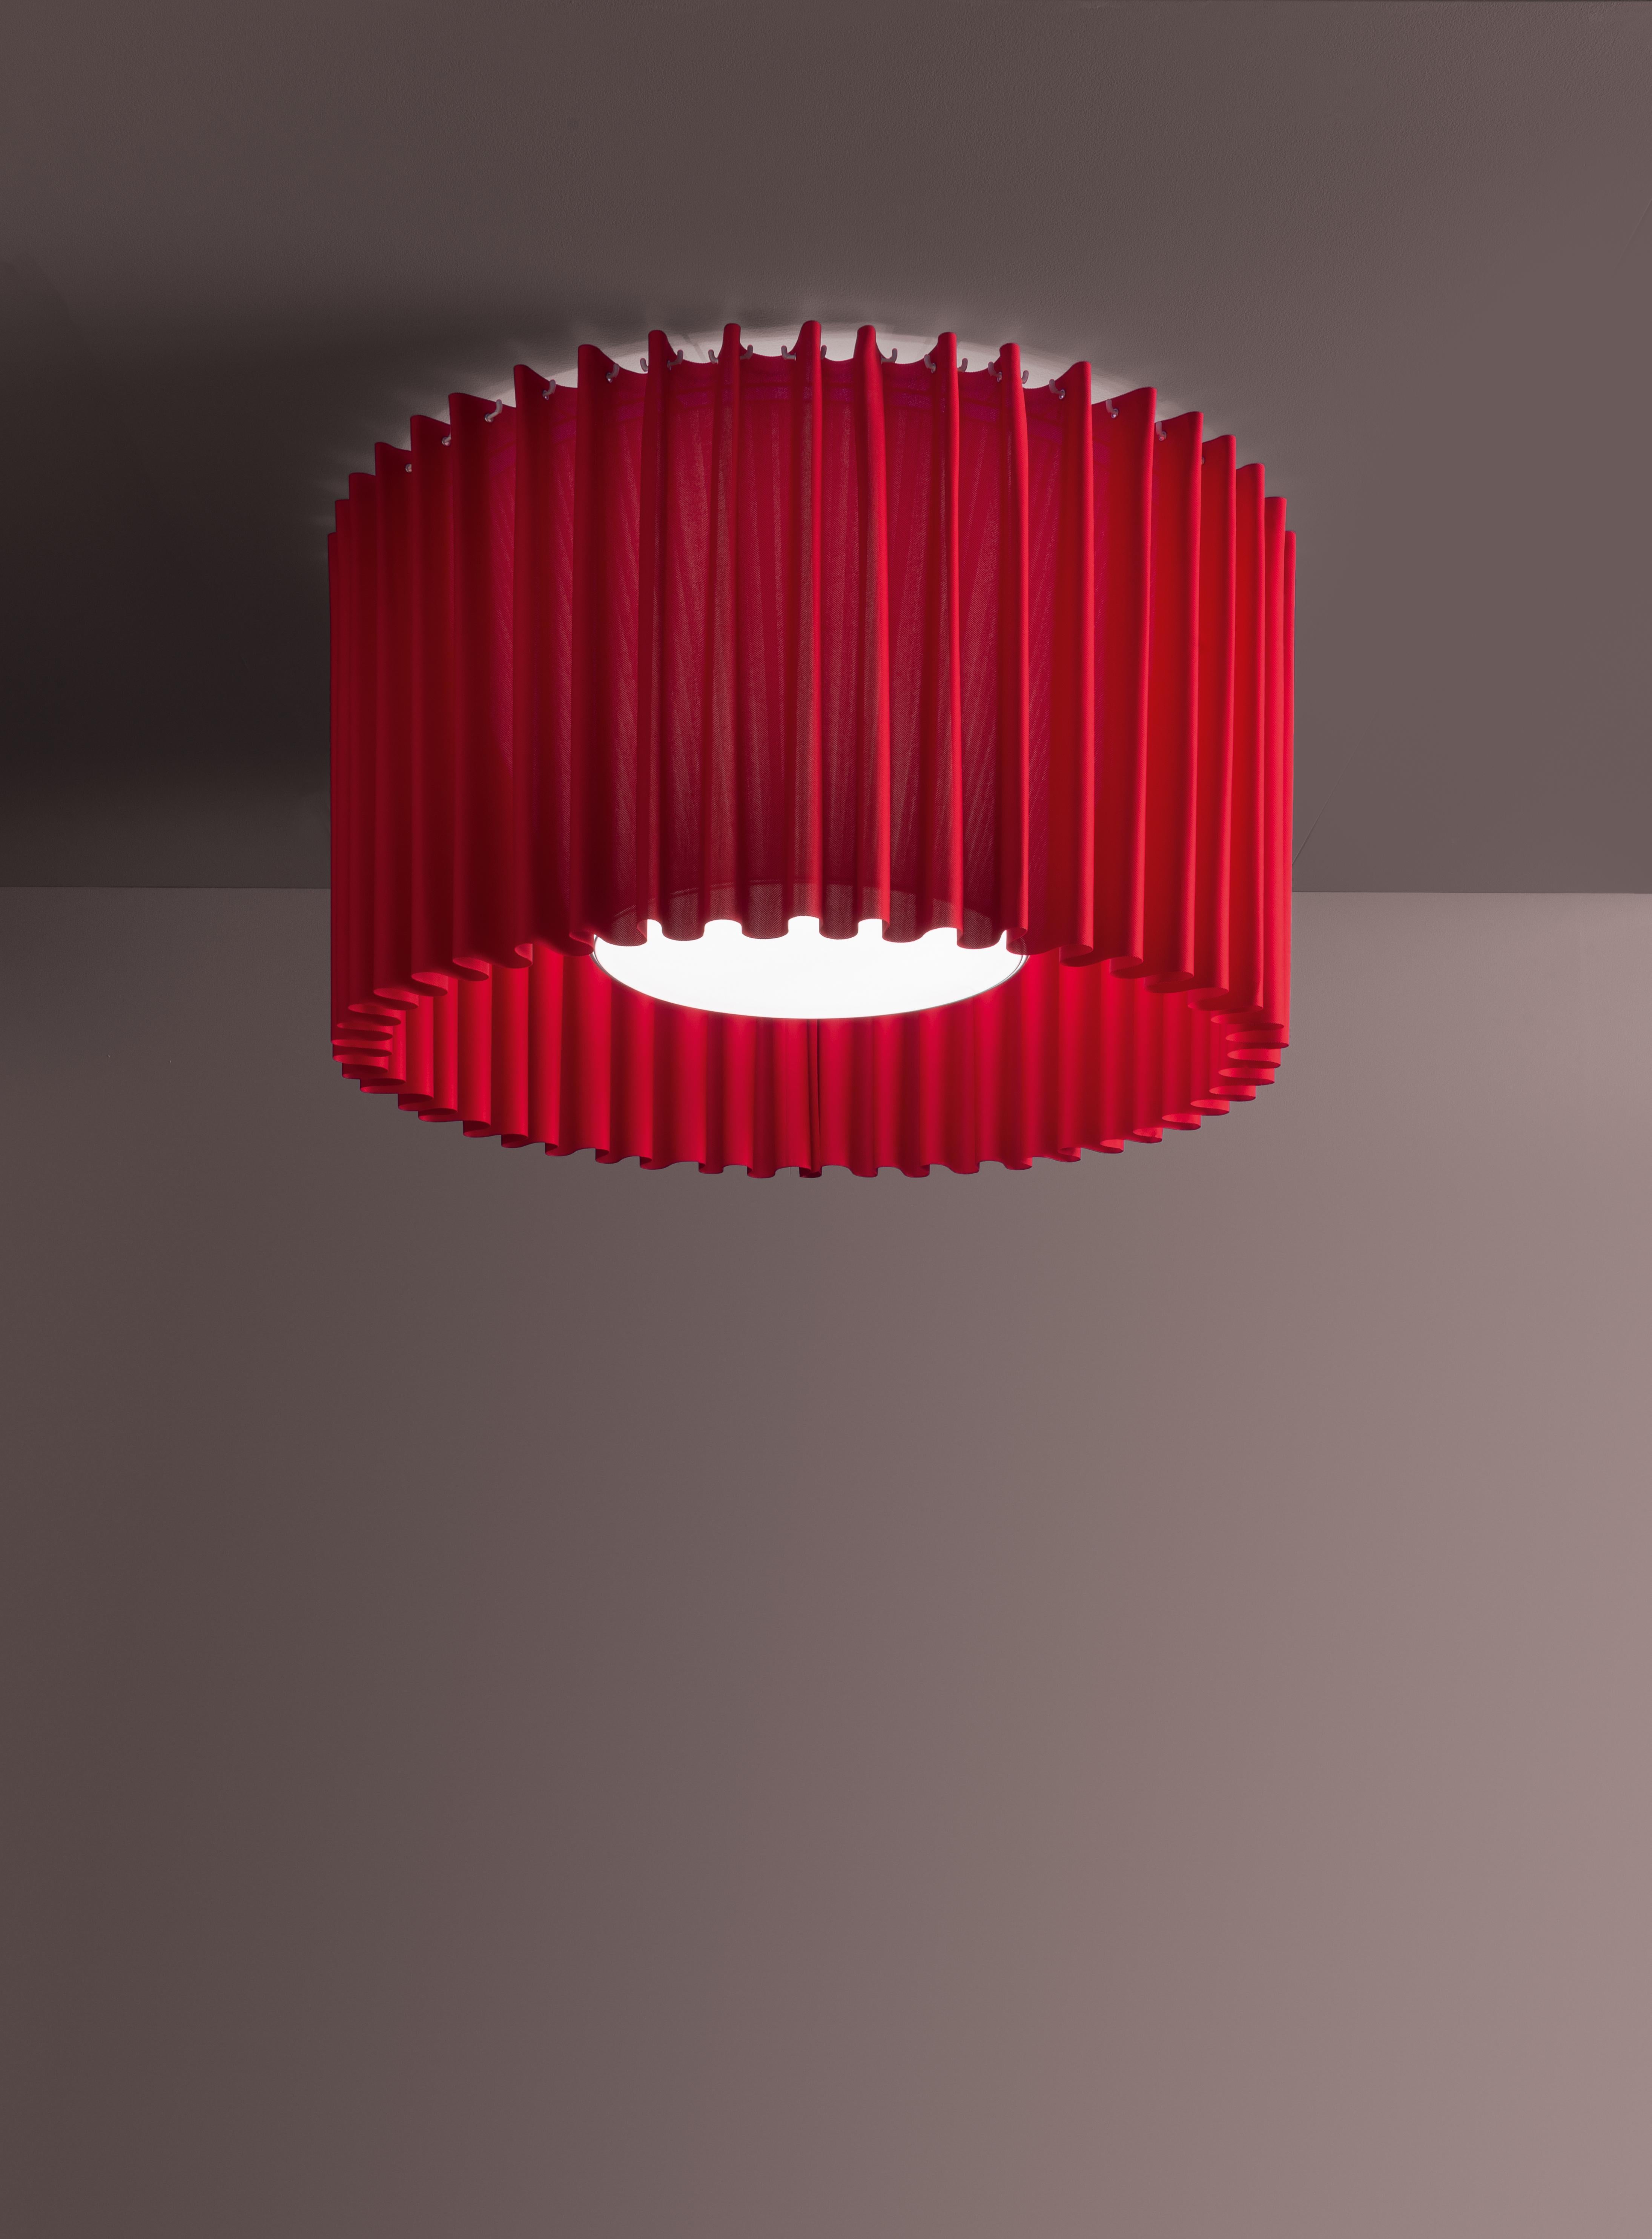 Axolight Skirt XL 150 Ceiling Light in Red by Manuel & Vanessa Vivian

Skirt takes inspiration from the world of fashion, in particular from the garment of the same name. The result is a collection of pendant lamps with a unique and elegant design,